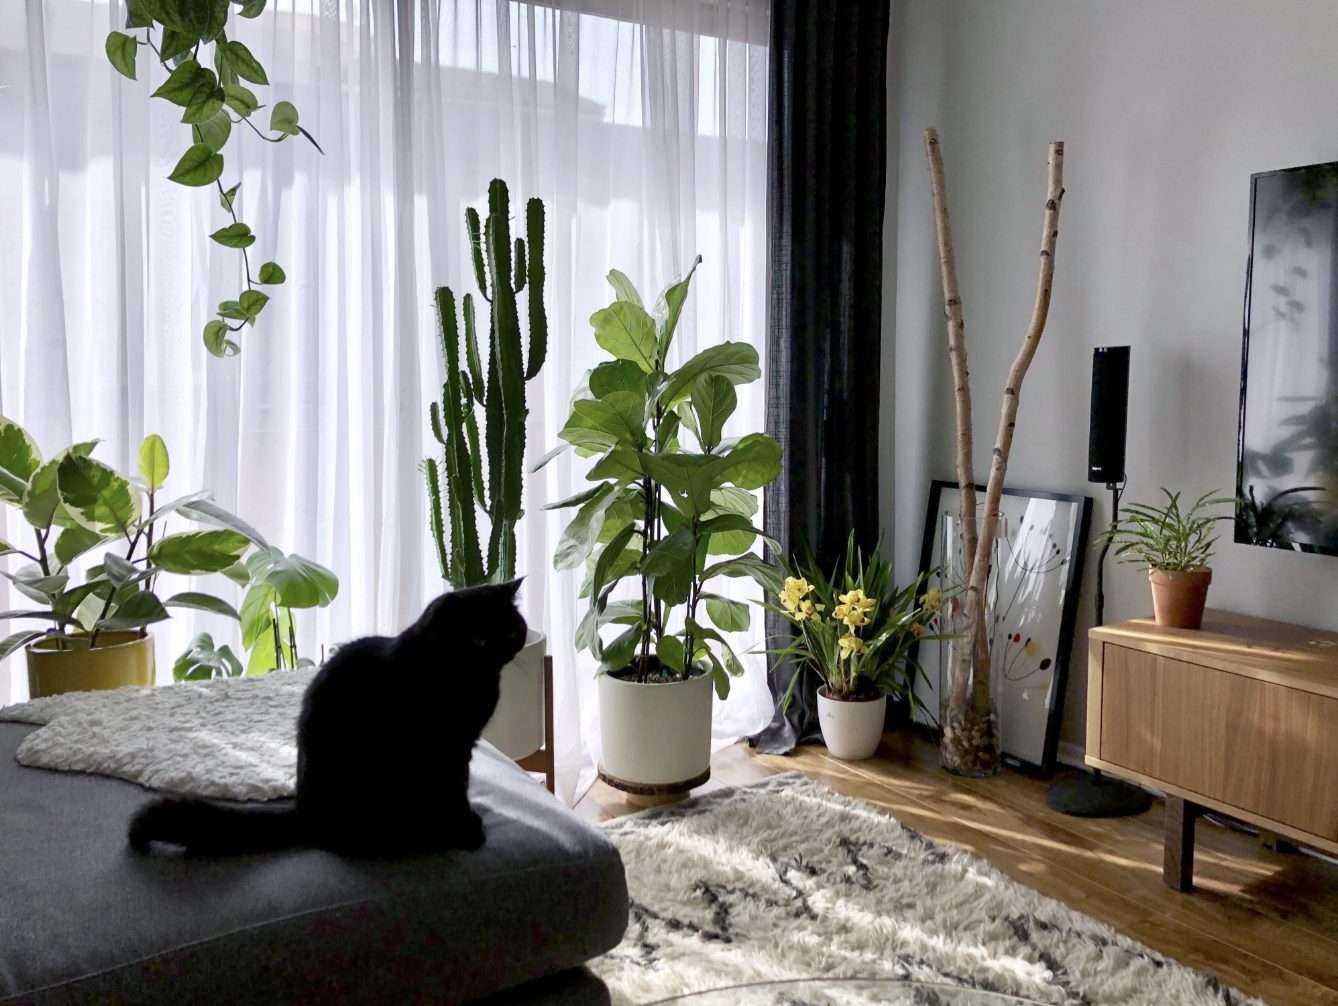 Room decorated with plants and cacti